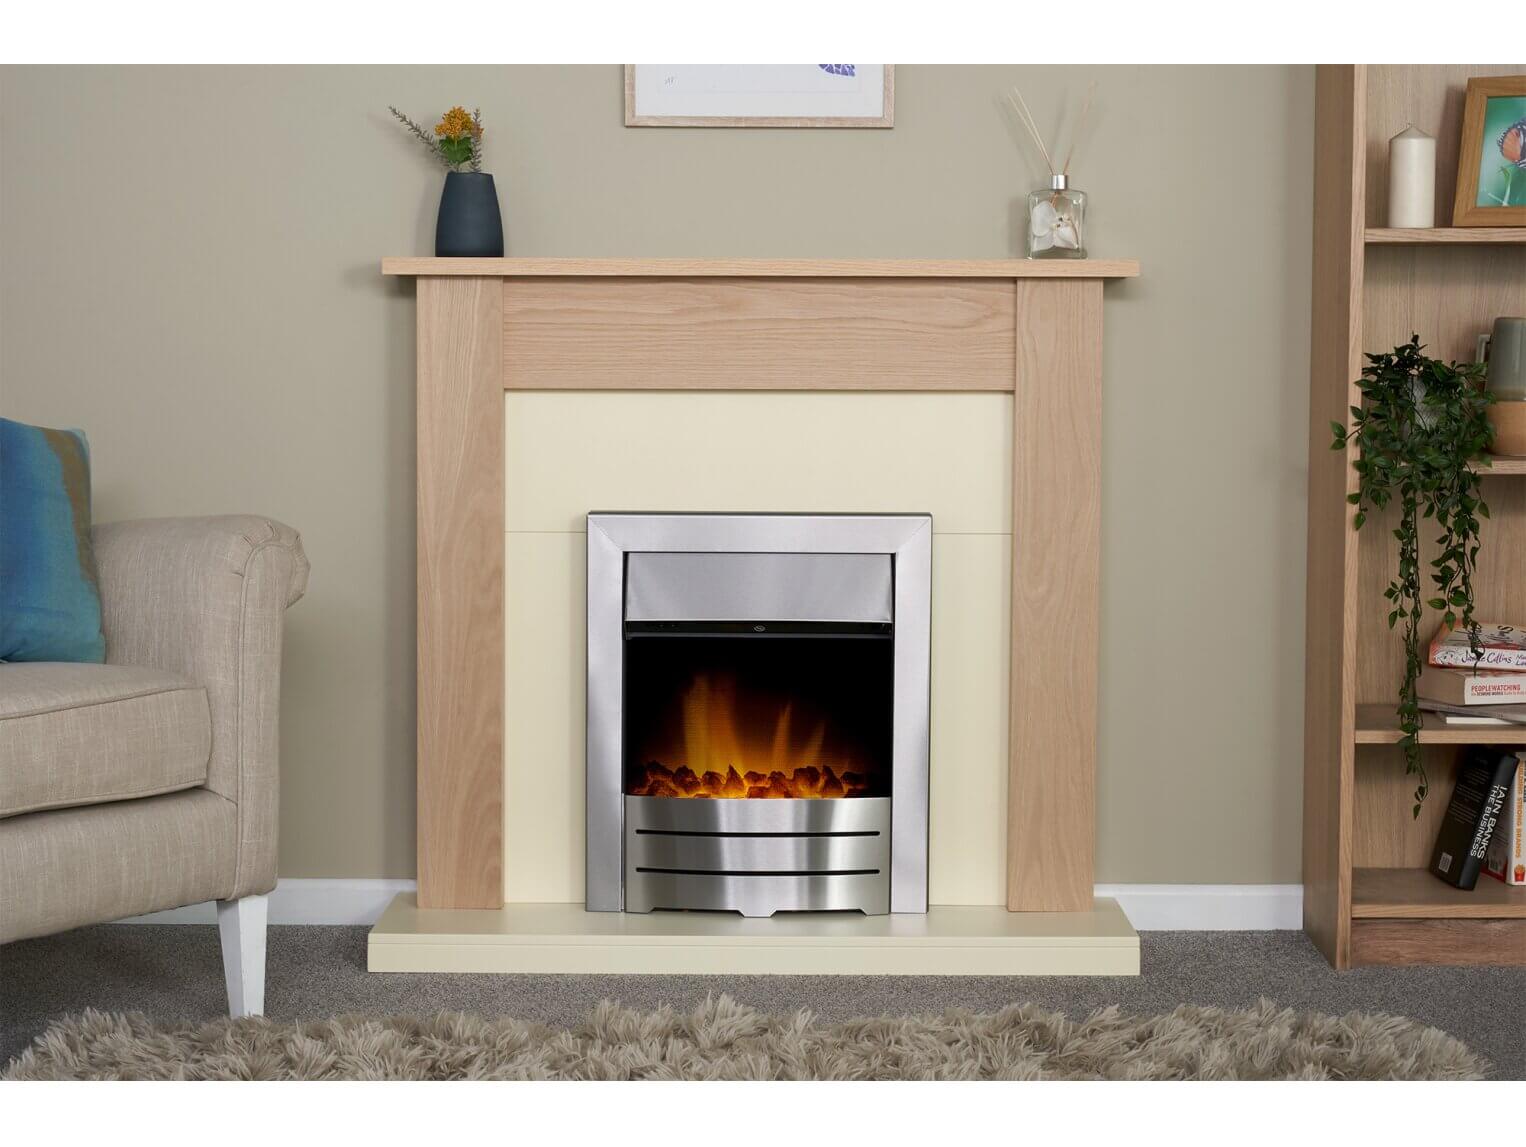 Adam Southwold Fireplace in Oak & Cream with Colorado Electric Fire in Brushed Steel - Glowing Flames